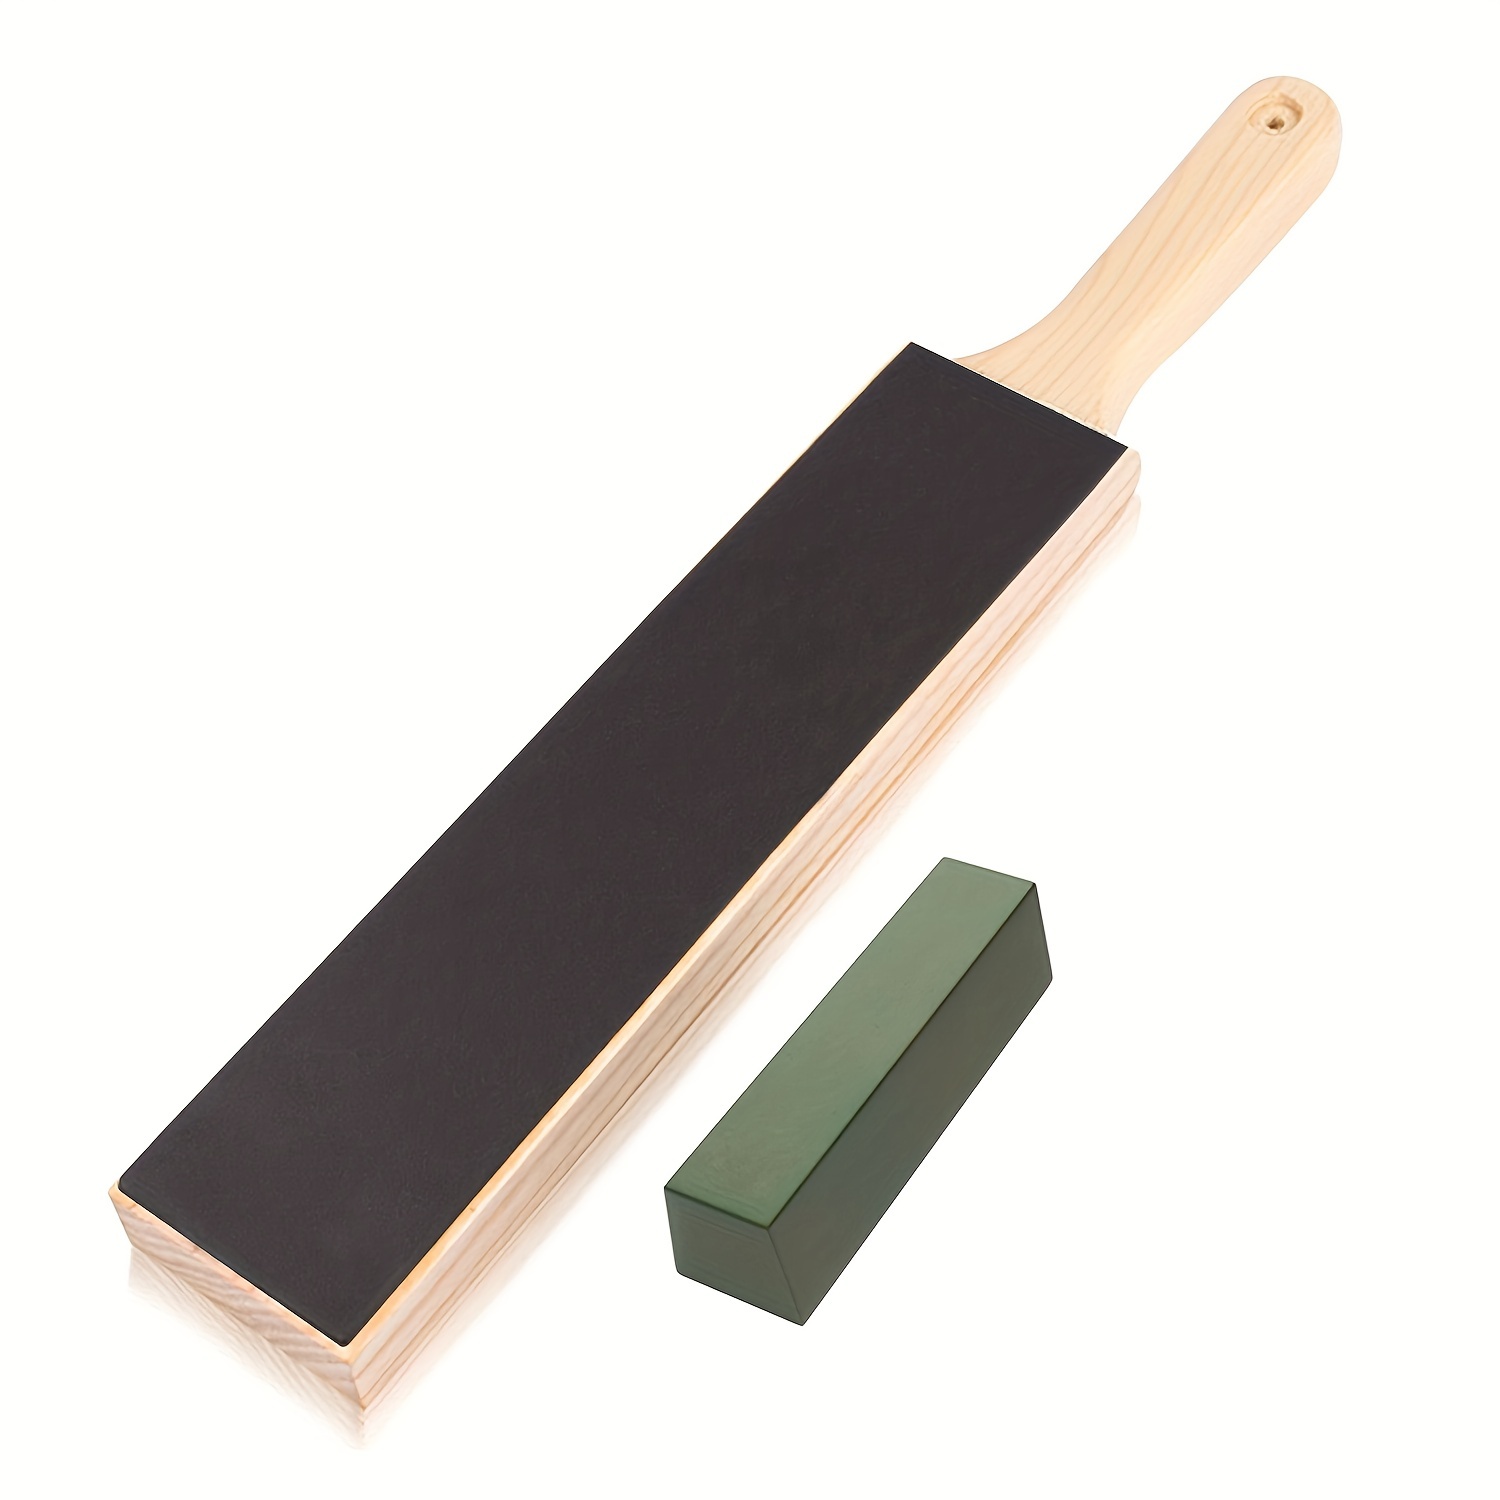 Artrize Paddle Strop 2 Sided - Italian Leather with Compounds for Knife Sharpening Stropping Kit Honing Razor Sharpener and Buffing Compound Axe